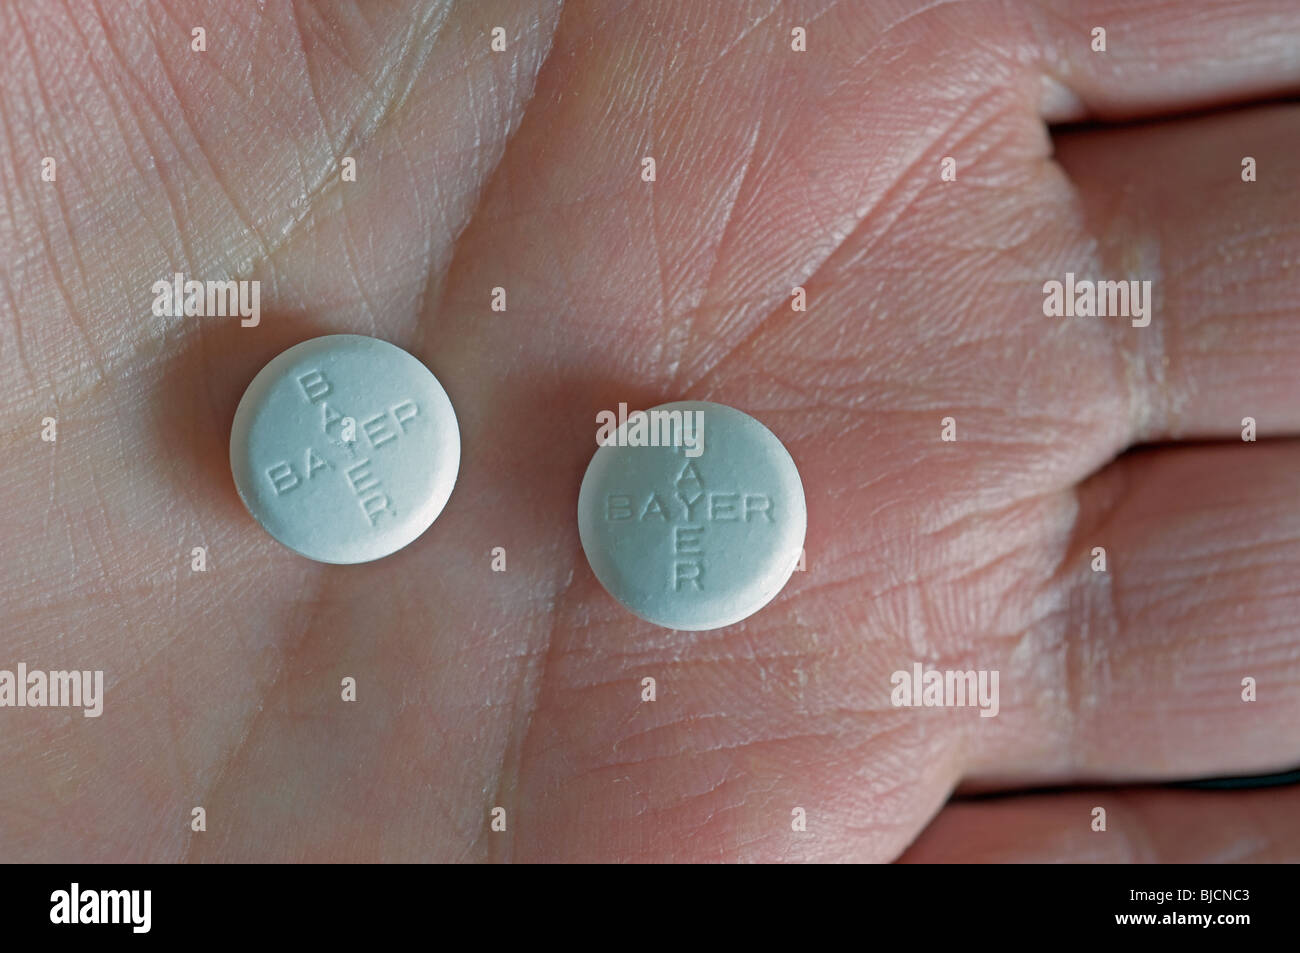 Aspirins manufactured by German pharmaceuticals company Bayer Stock Photo